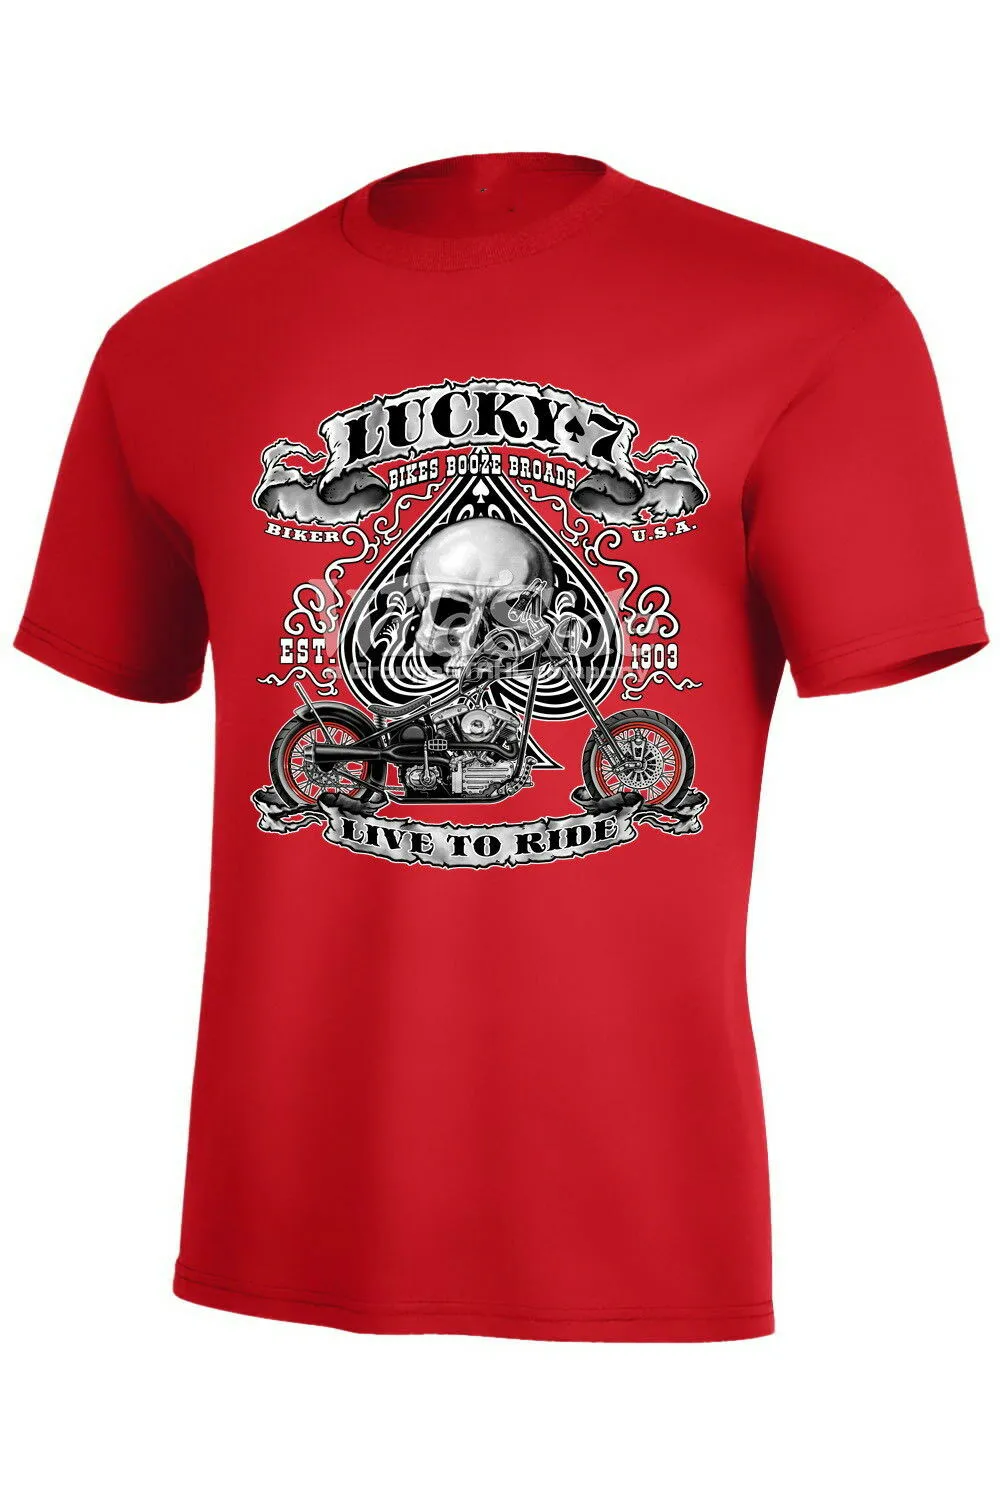 

Lucky Bikes Booze Broads Live To Ride Biker Adult Graphic Funny T-Shirt